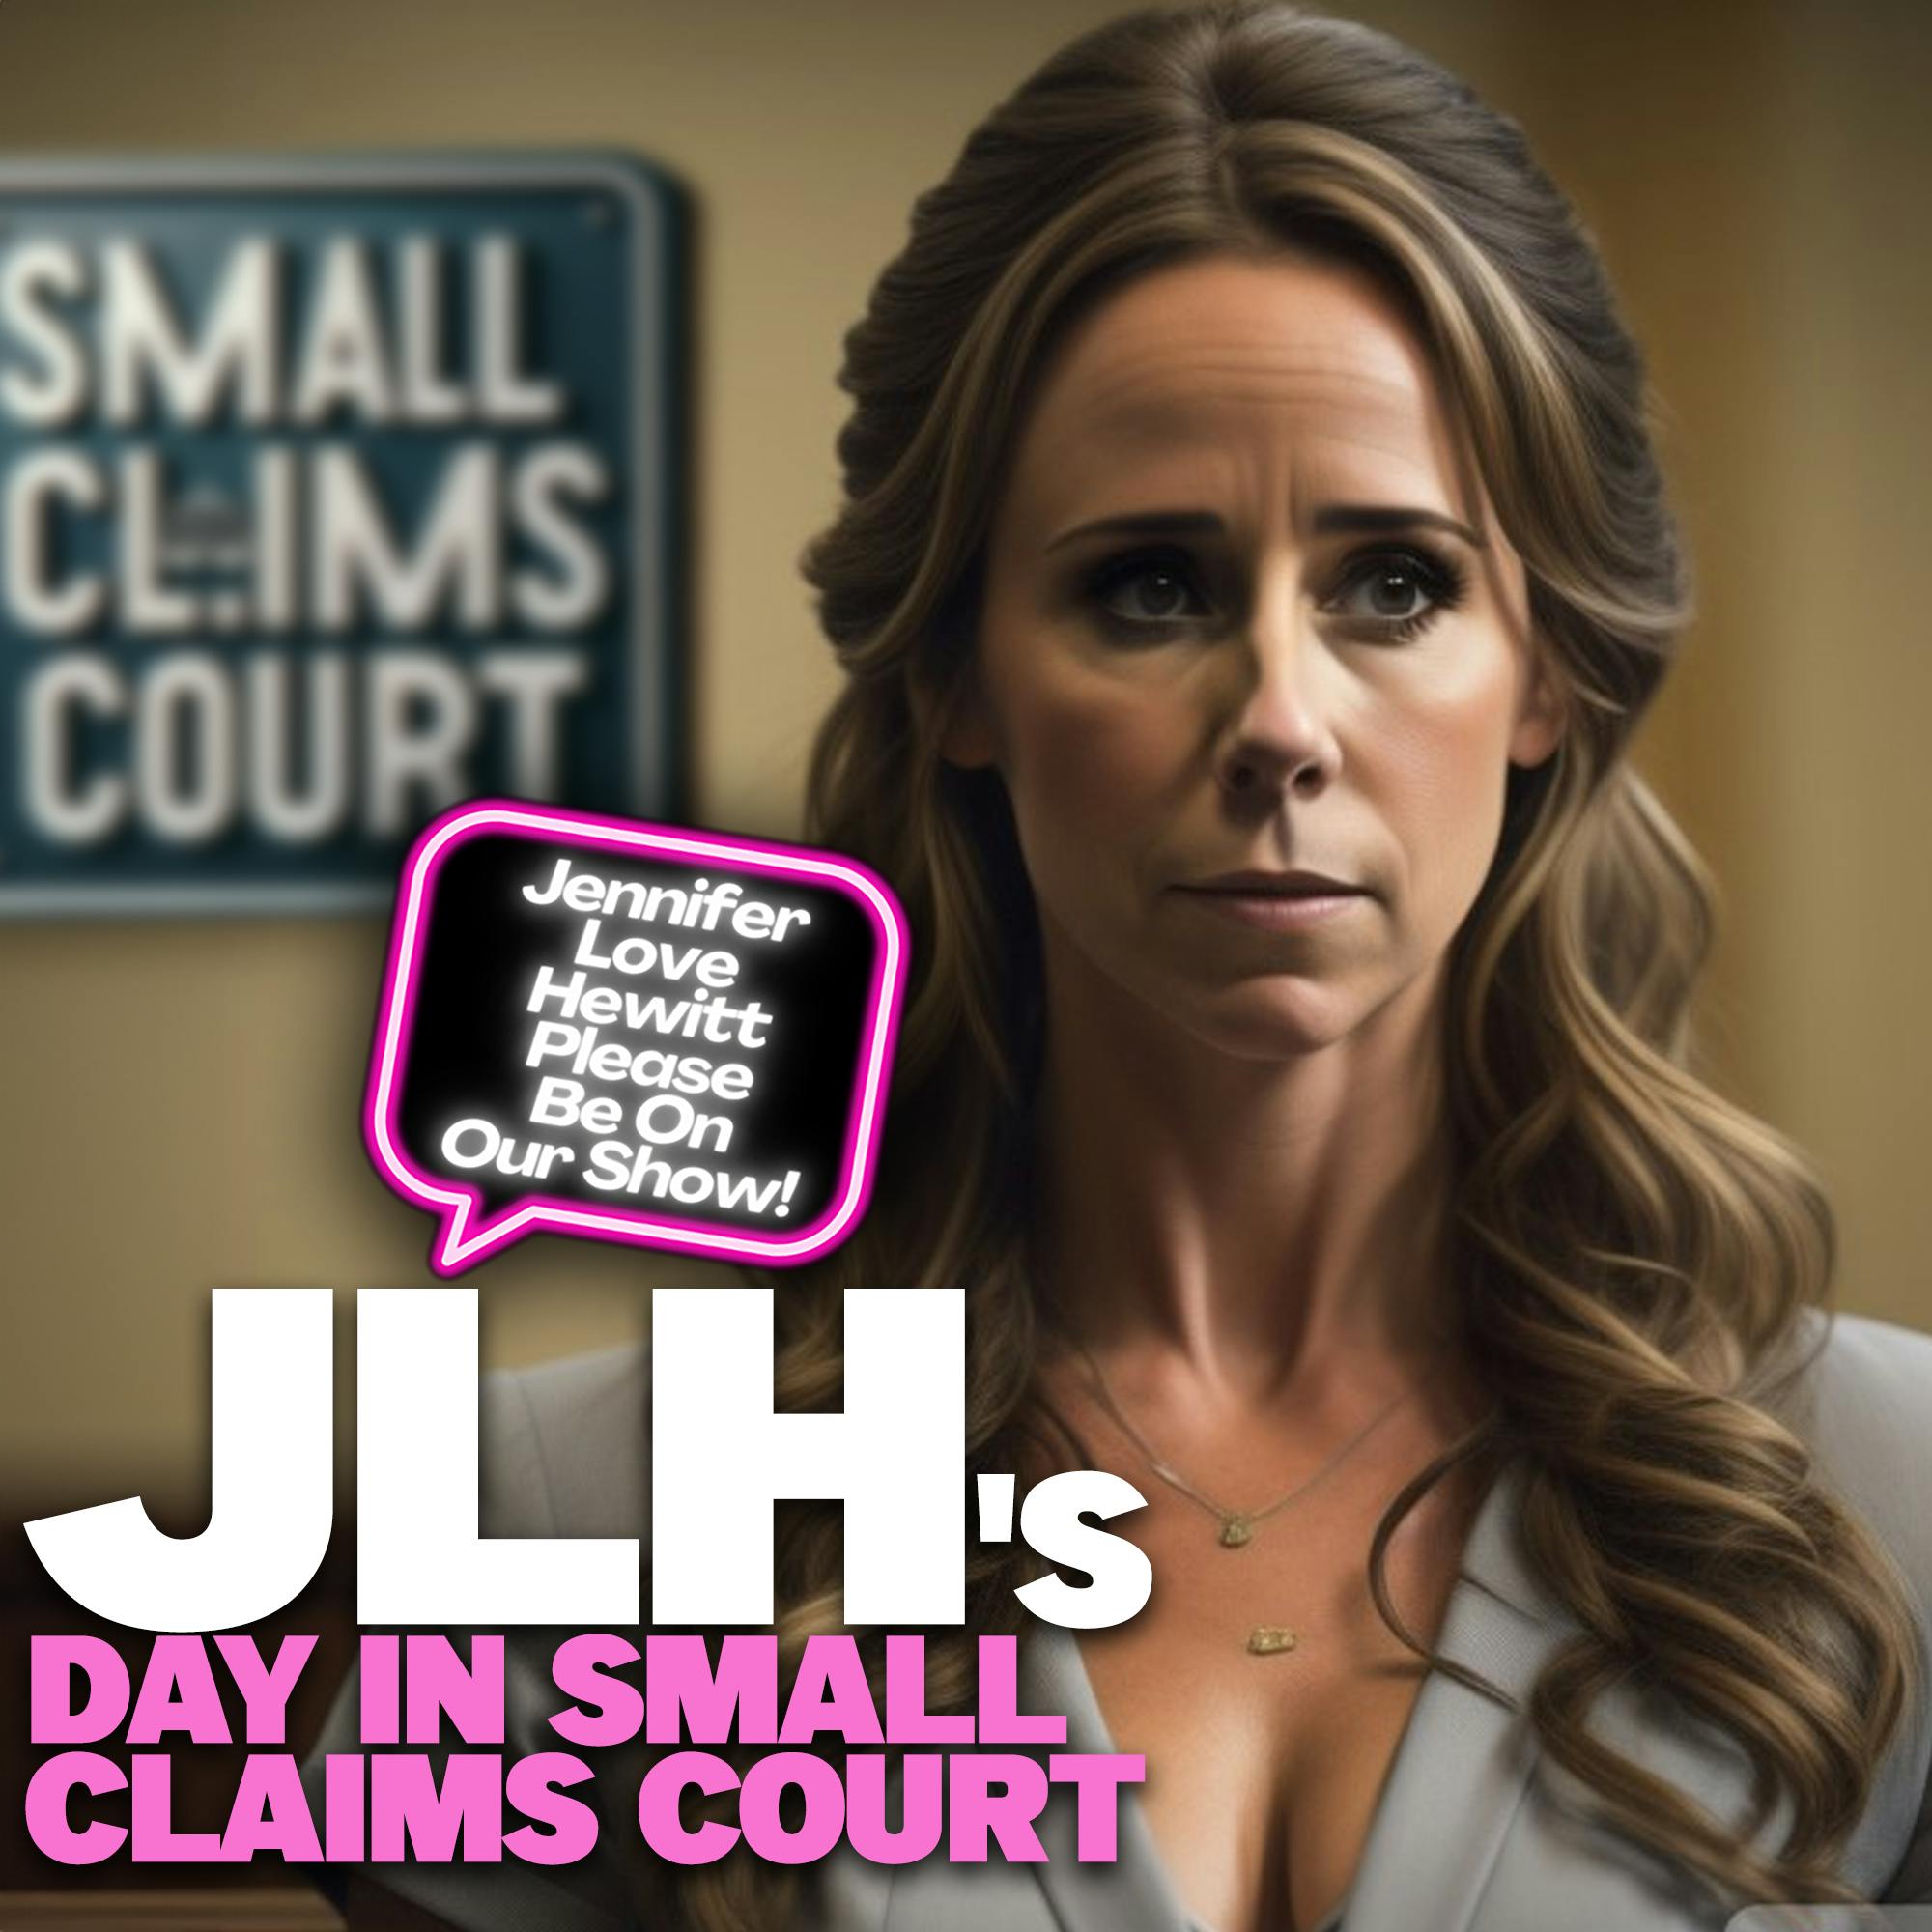 Jennifer Love Hewitt's Day in Small Claims Court